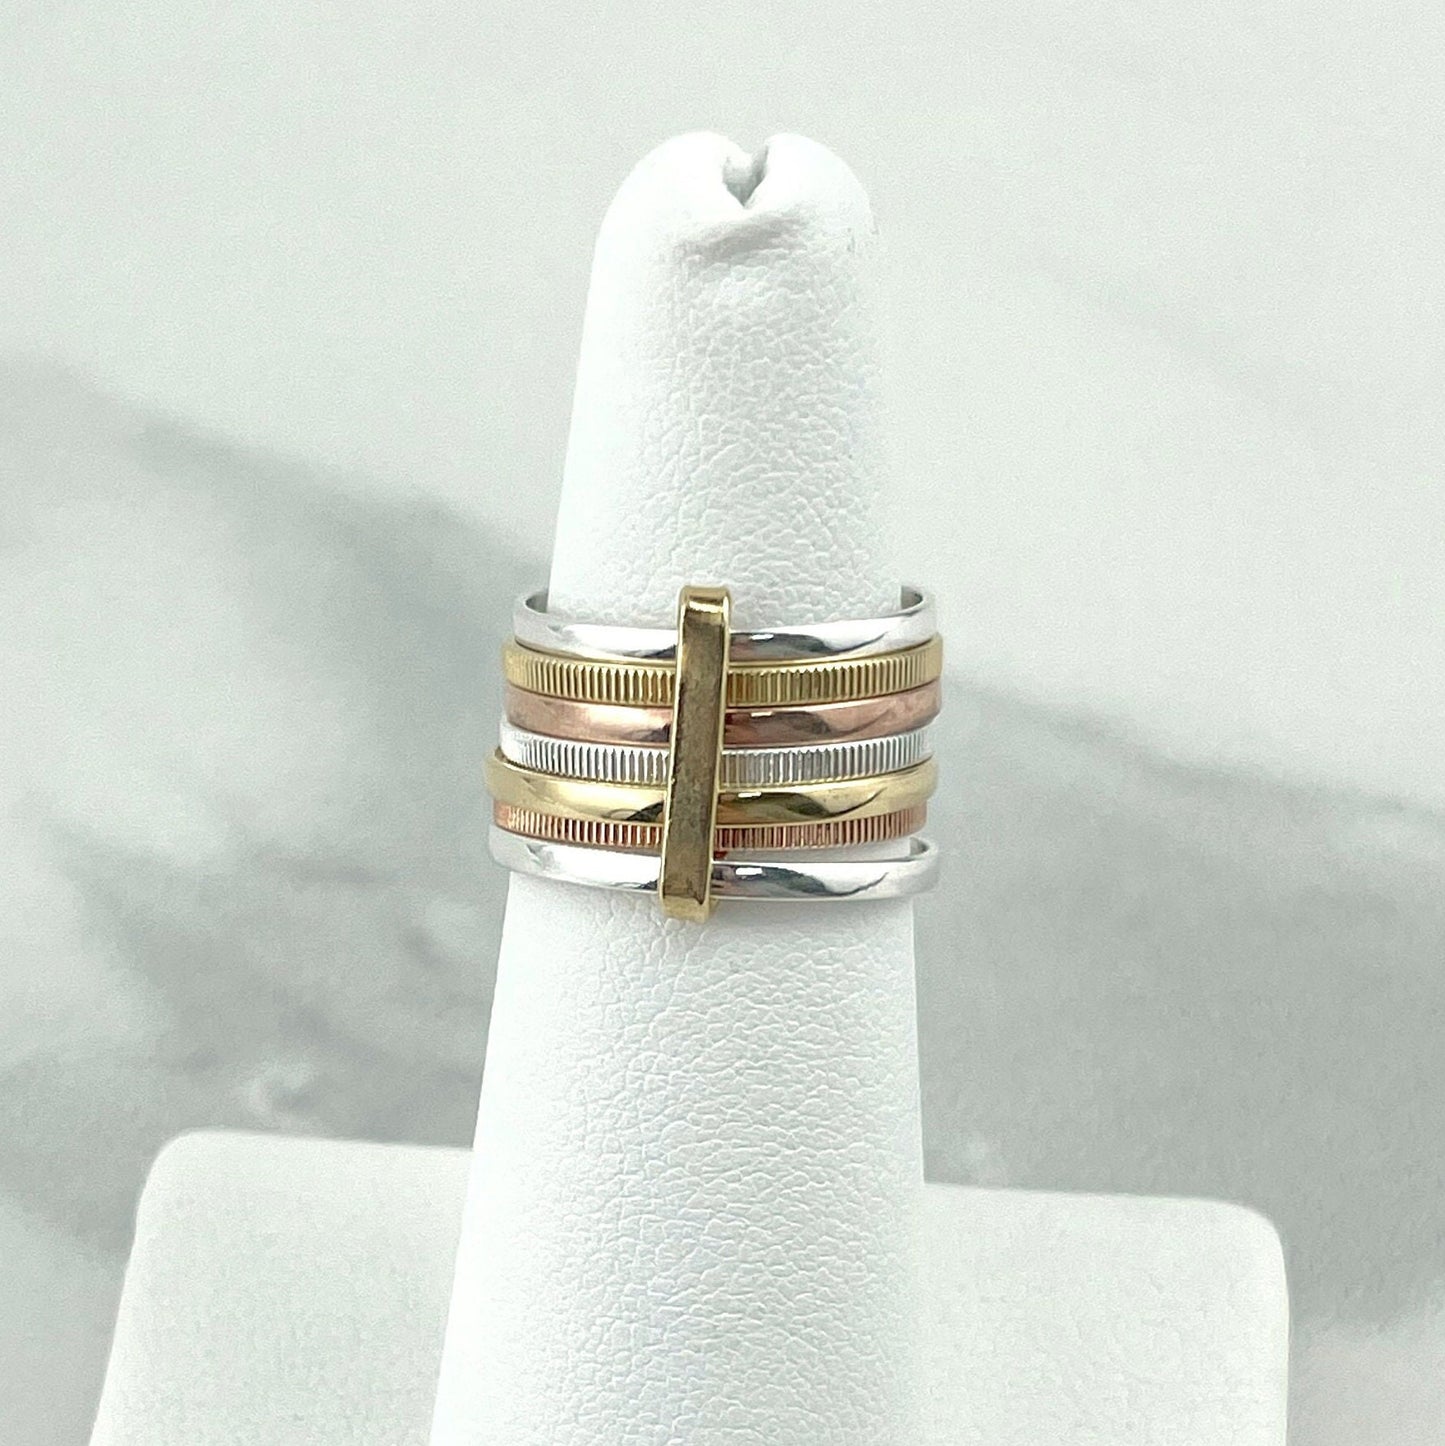 18k Gold Filled Three Tone, Gold, Rose Gold And Silver Midi Spinner Ring Wholesale Jewelry Making Supplies